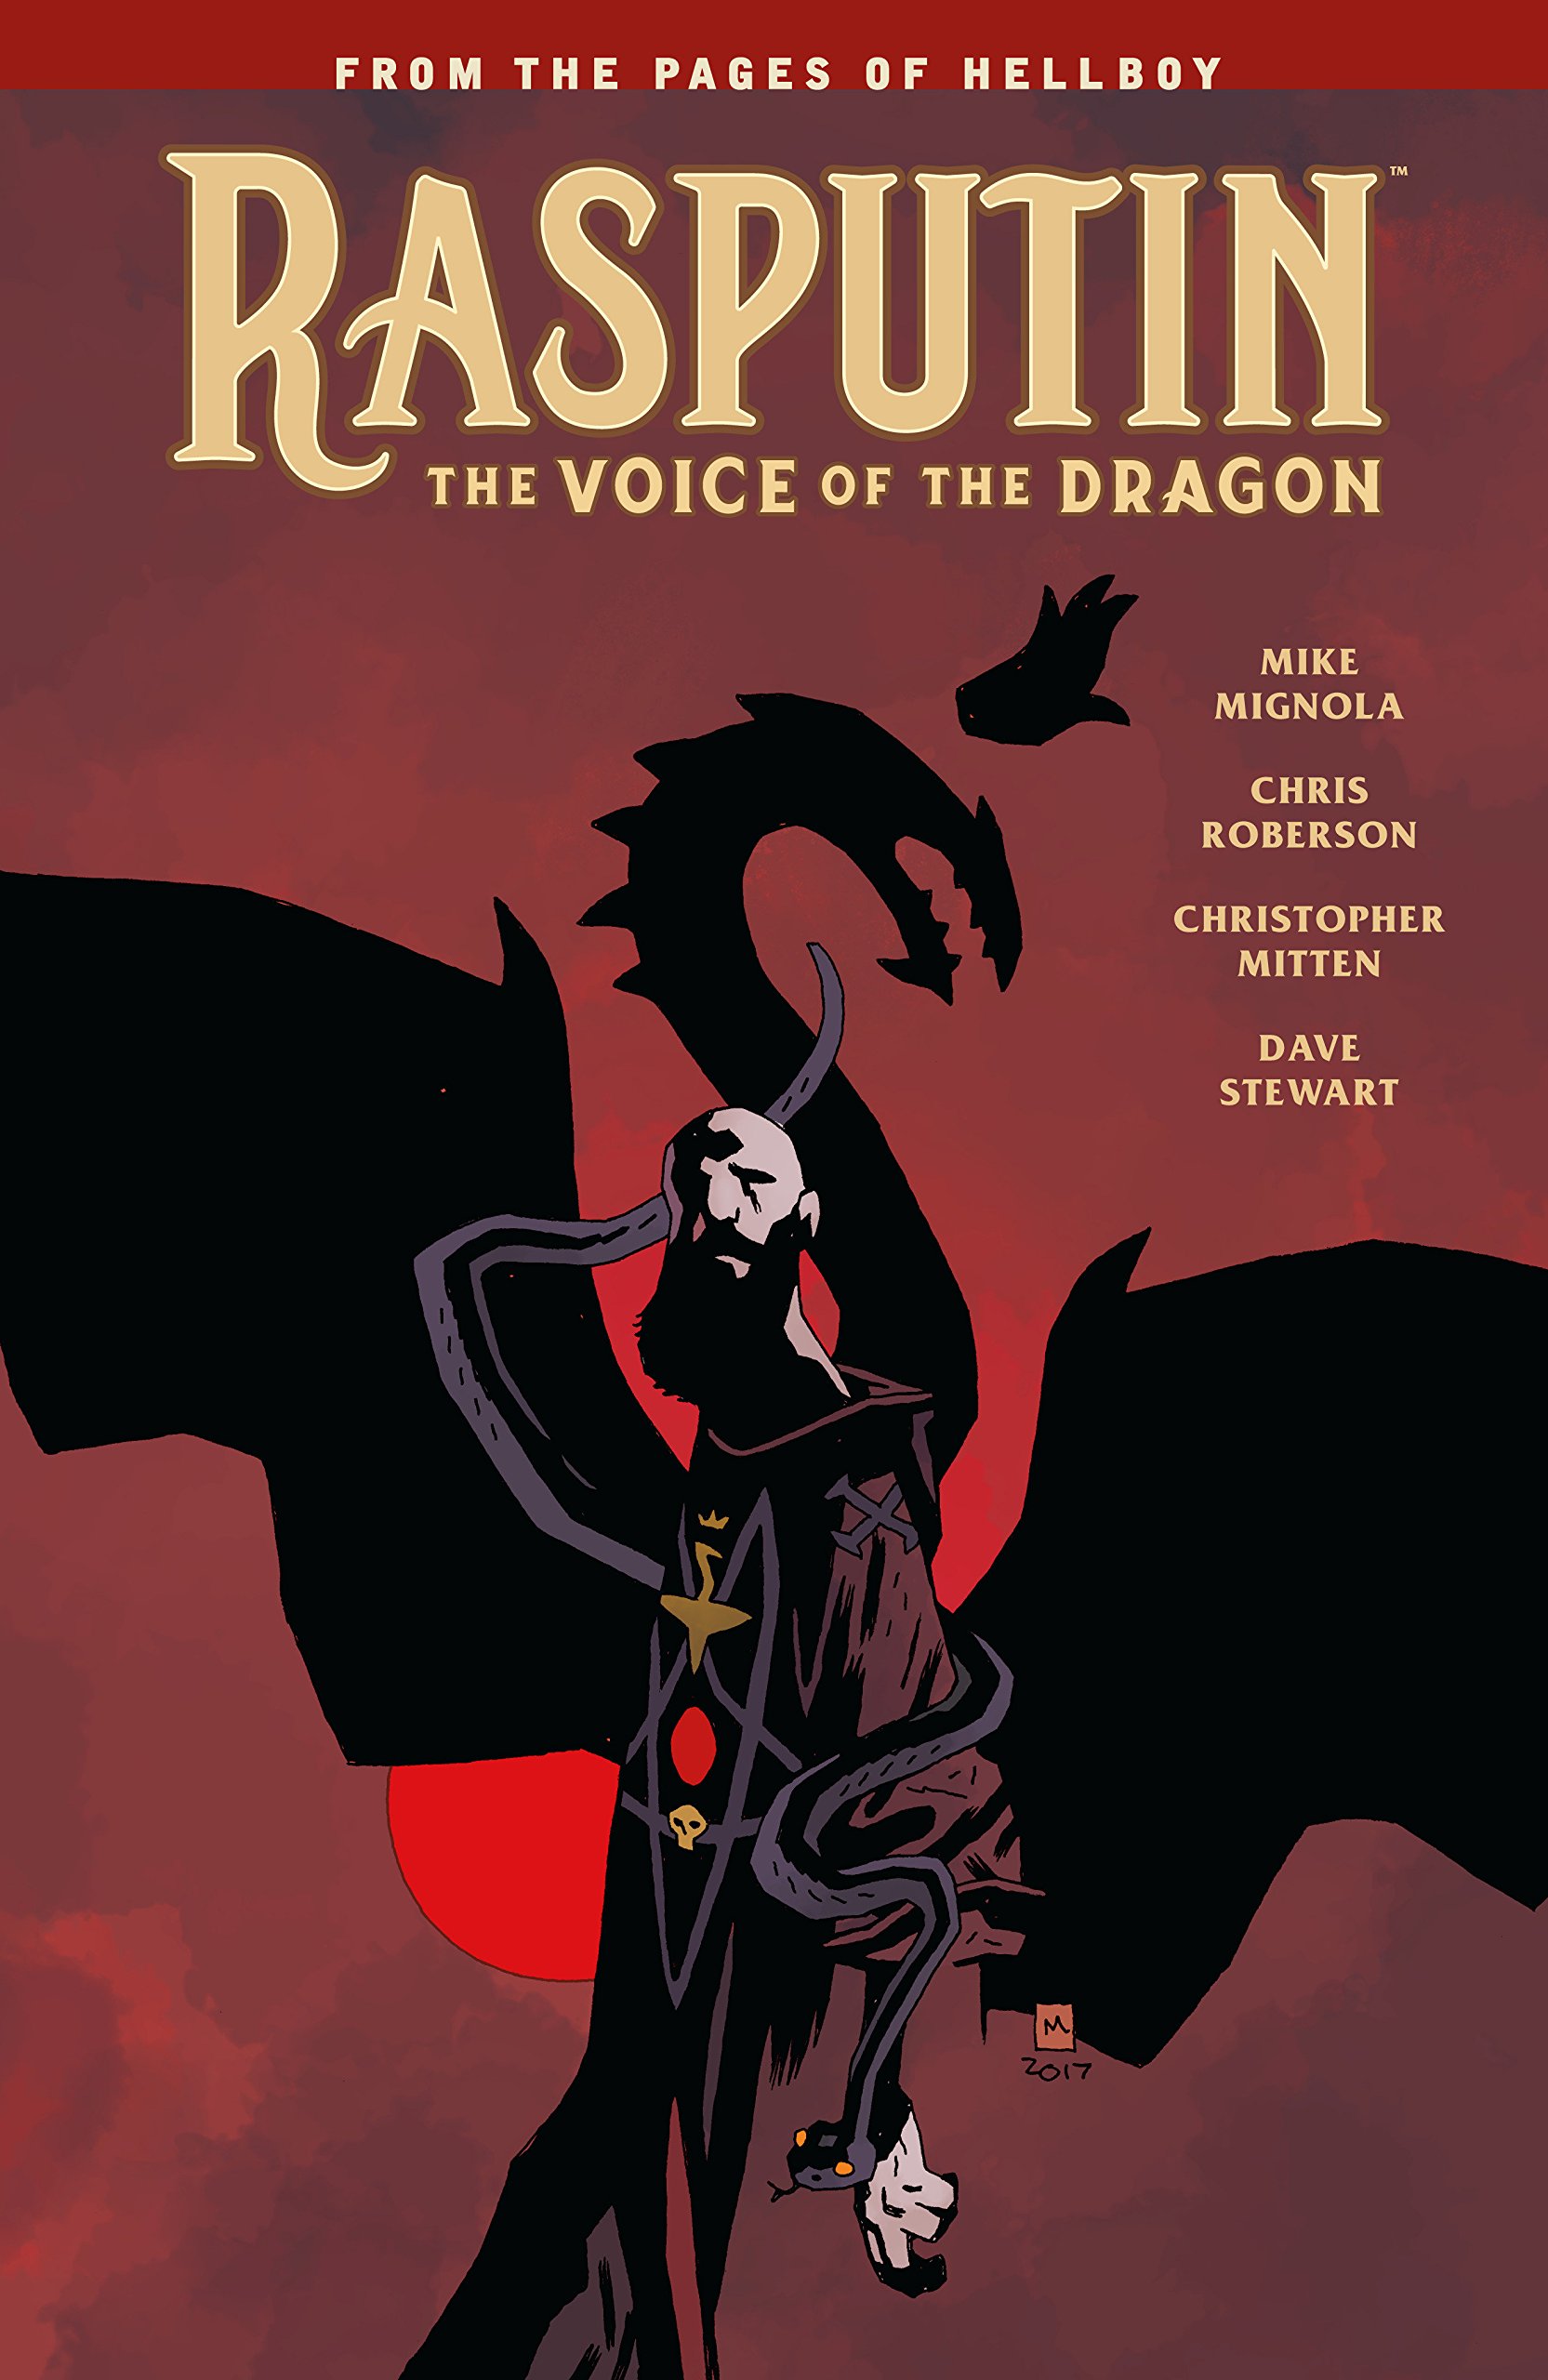 Look Out For … Rasputin The Voice Of The Dragon By Mike Mignola Chris Roberson And Dave